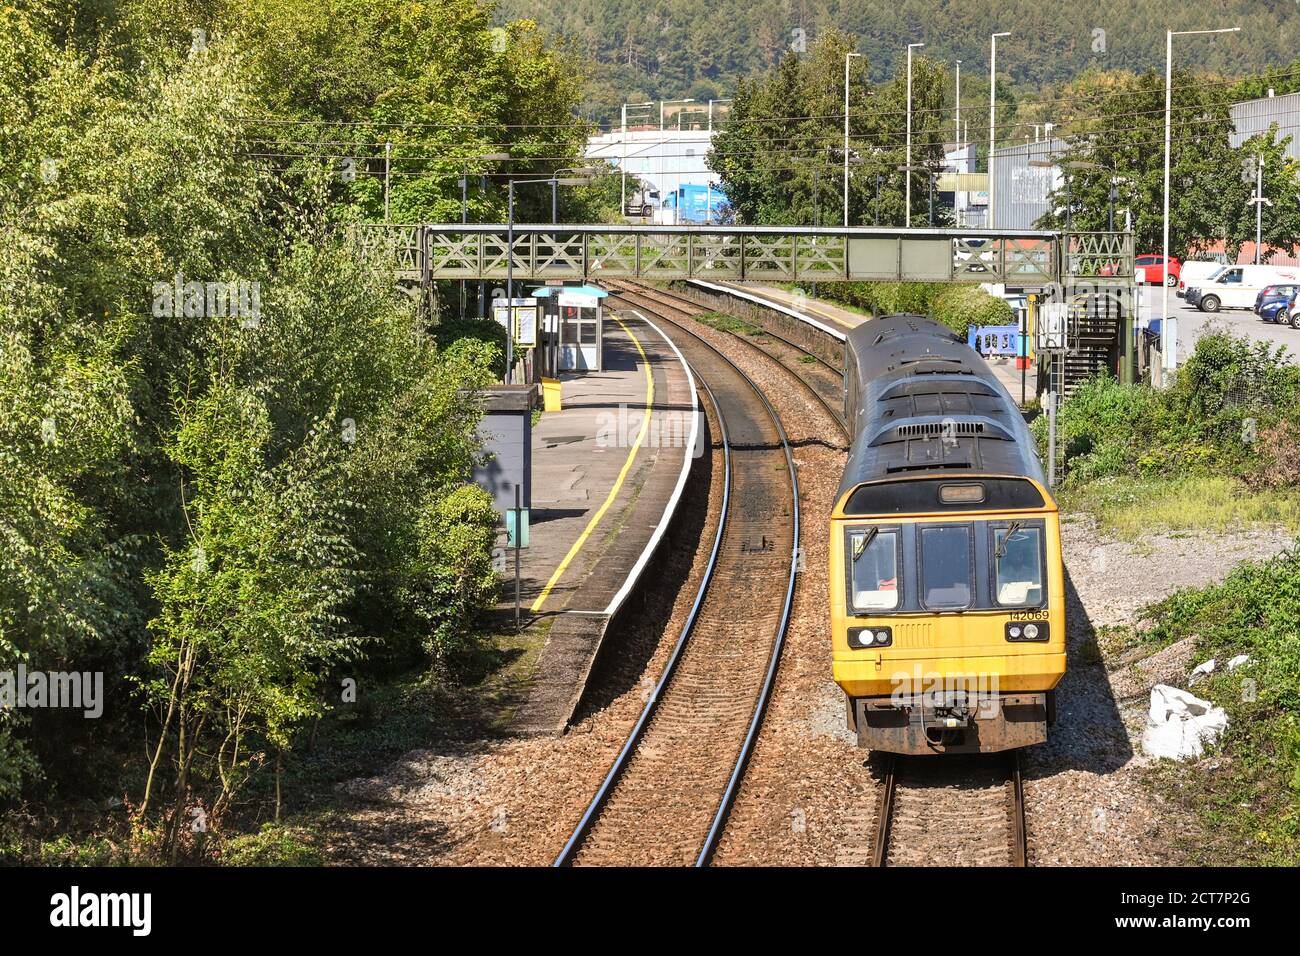 Taffs Well, near Cardiff, Wales - September 2020: Commuter train leaving Taffs Well station bound for Cardiff. Stock Photo